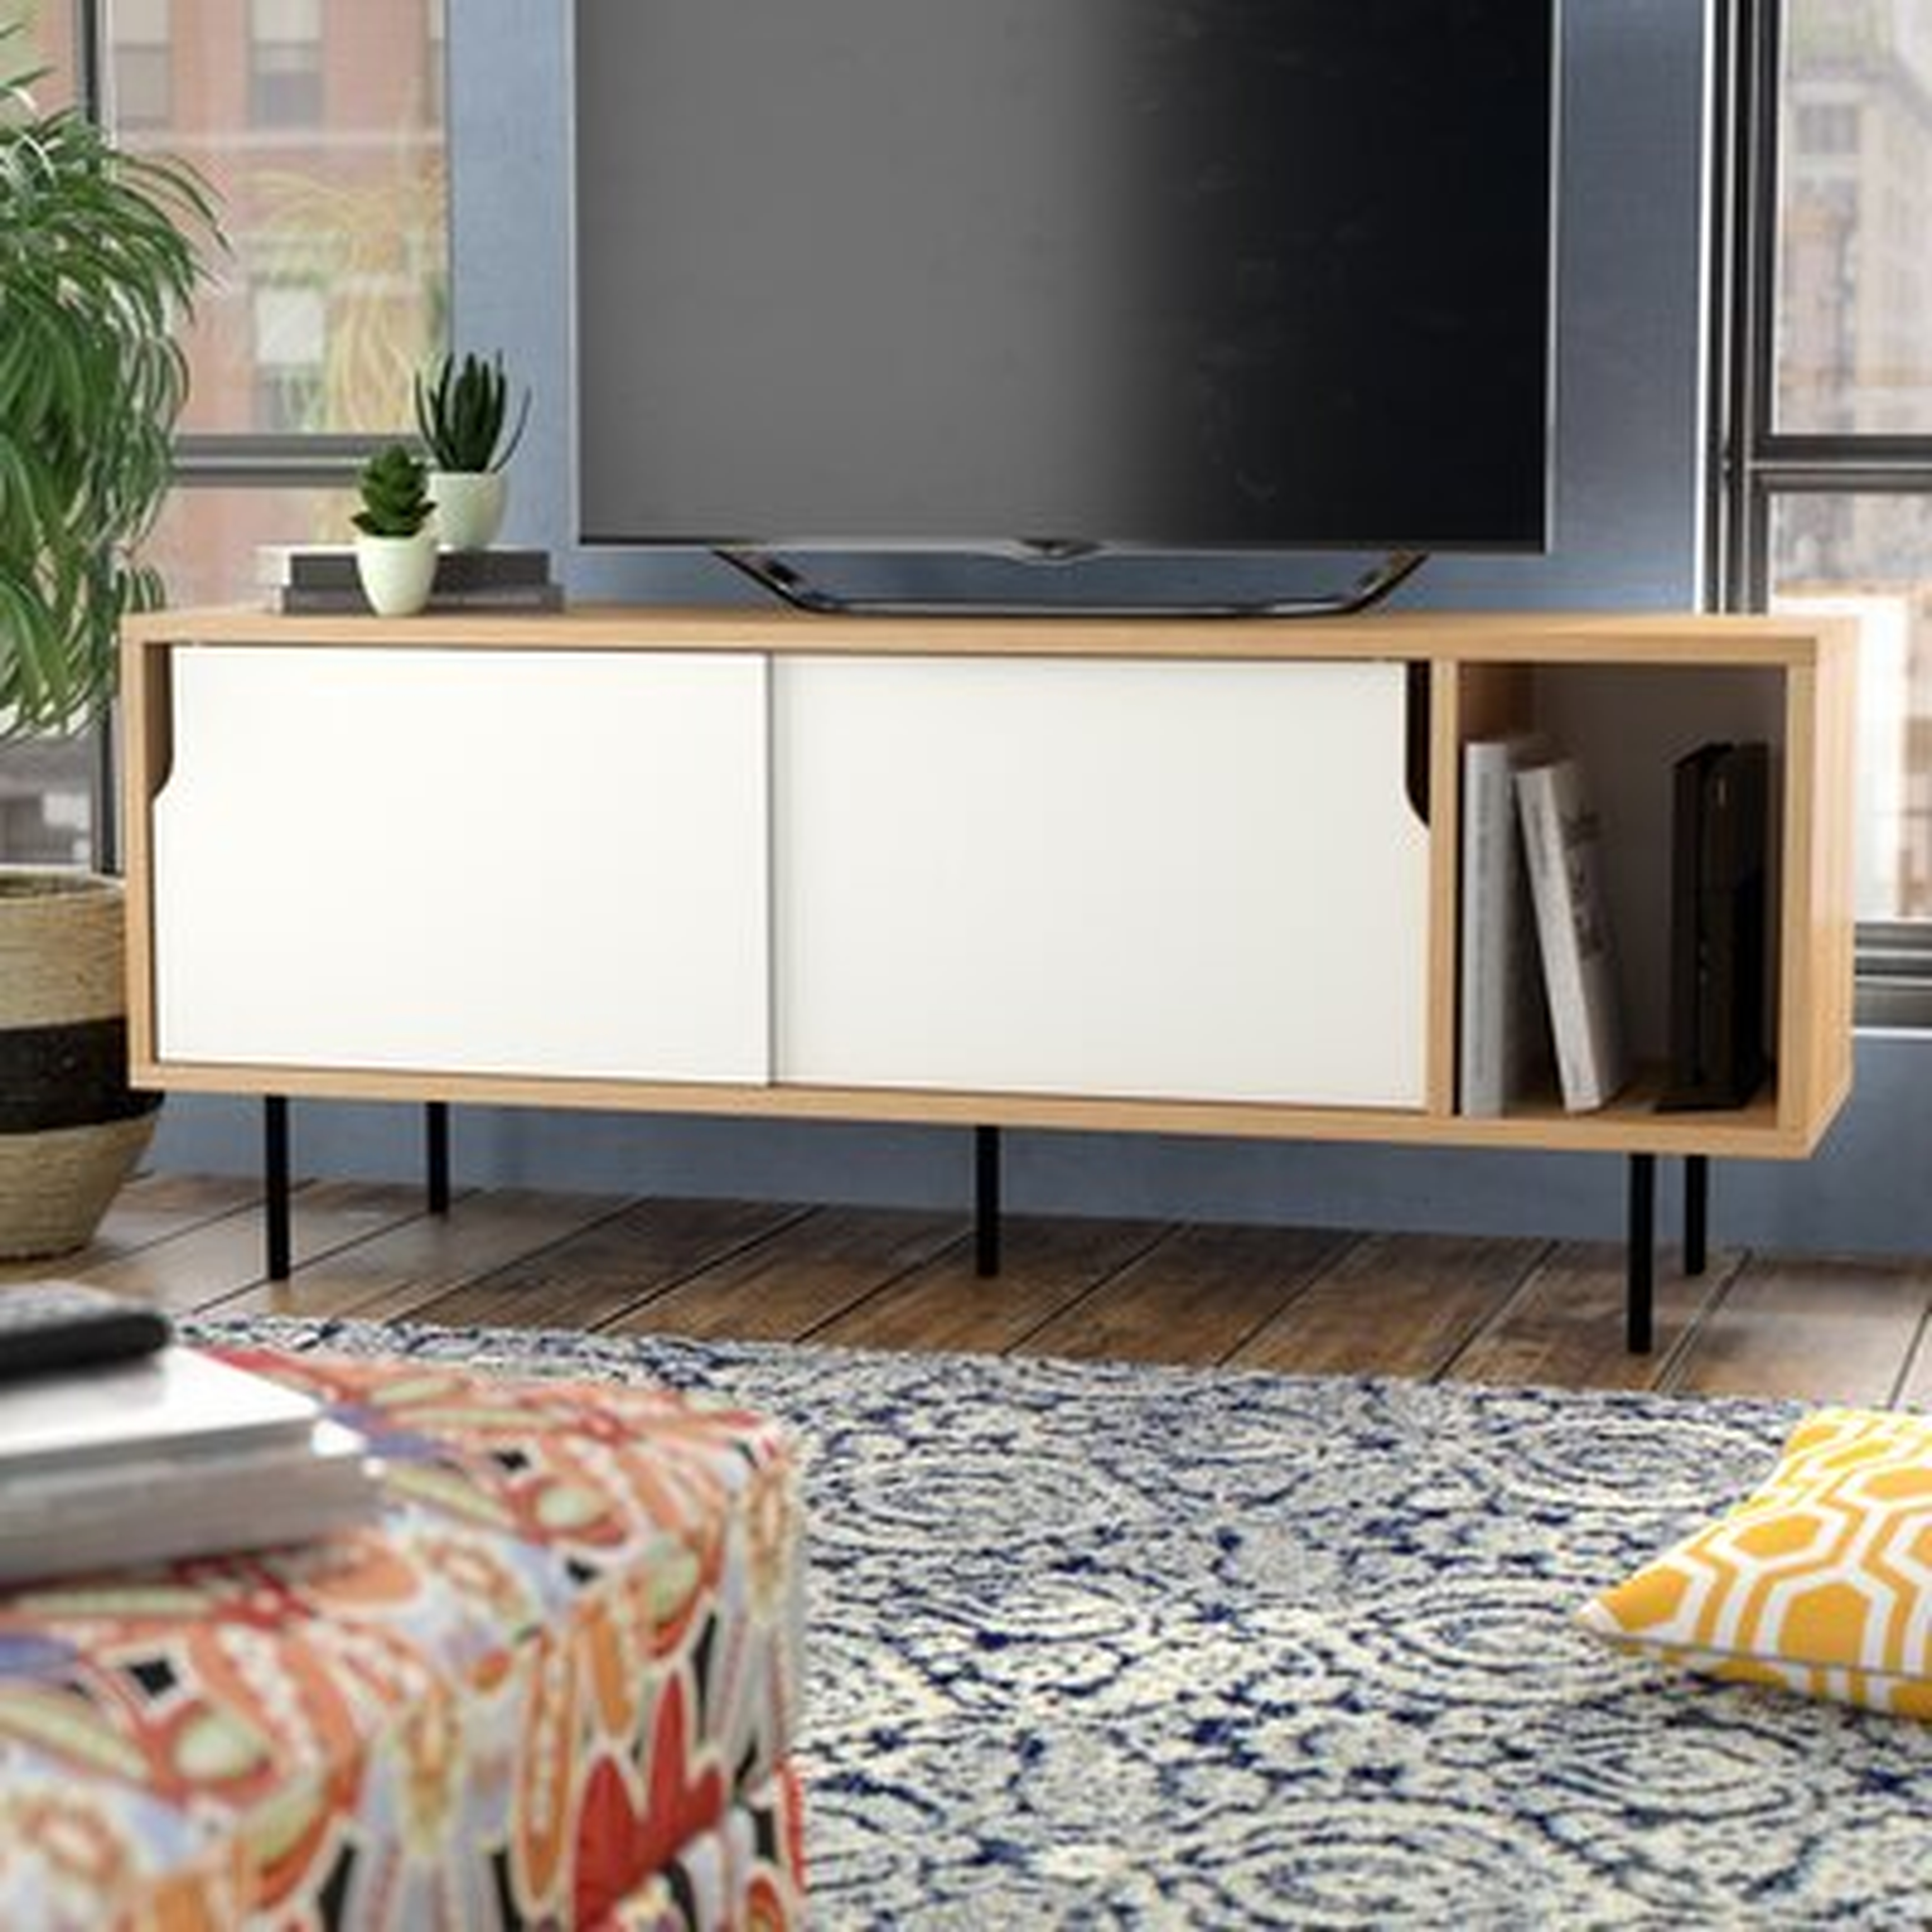 Brendon TV Stand for TVs up to 70" - Wayfair